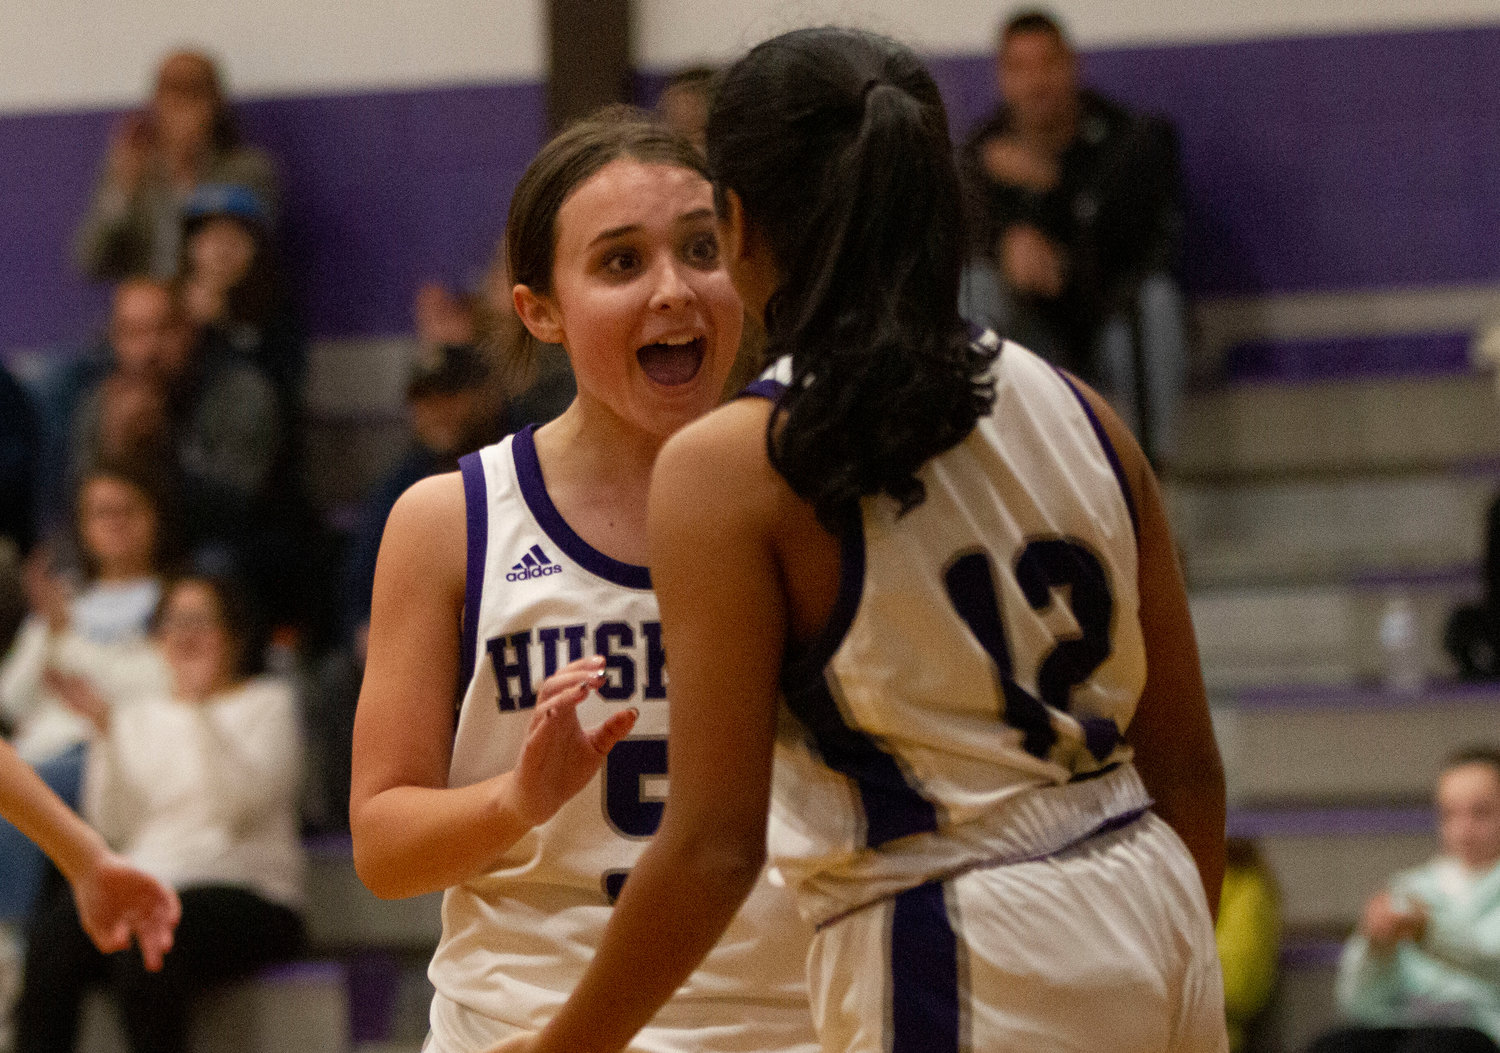 Maddy Butterworth gives kudos to teammate Shivani Metha after she made a basket and collected a foul.